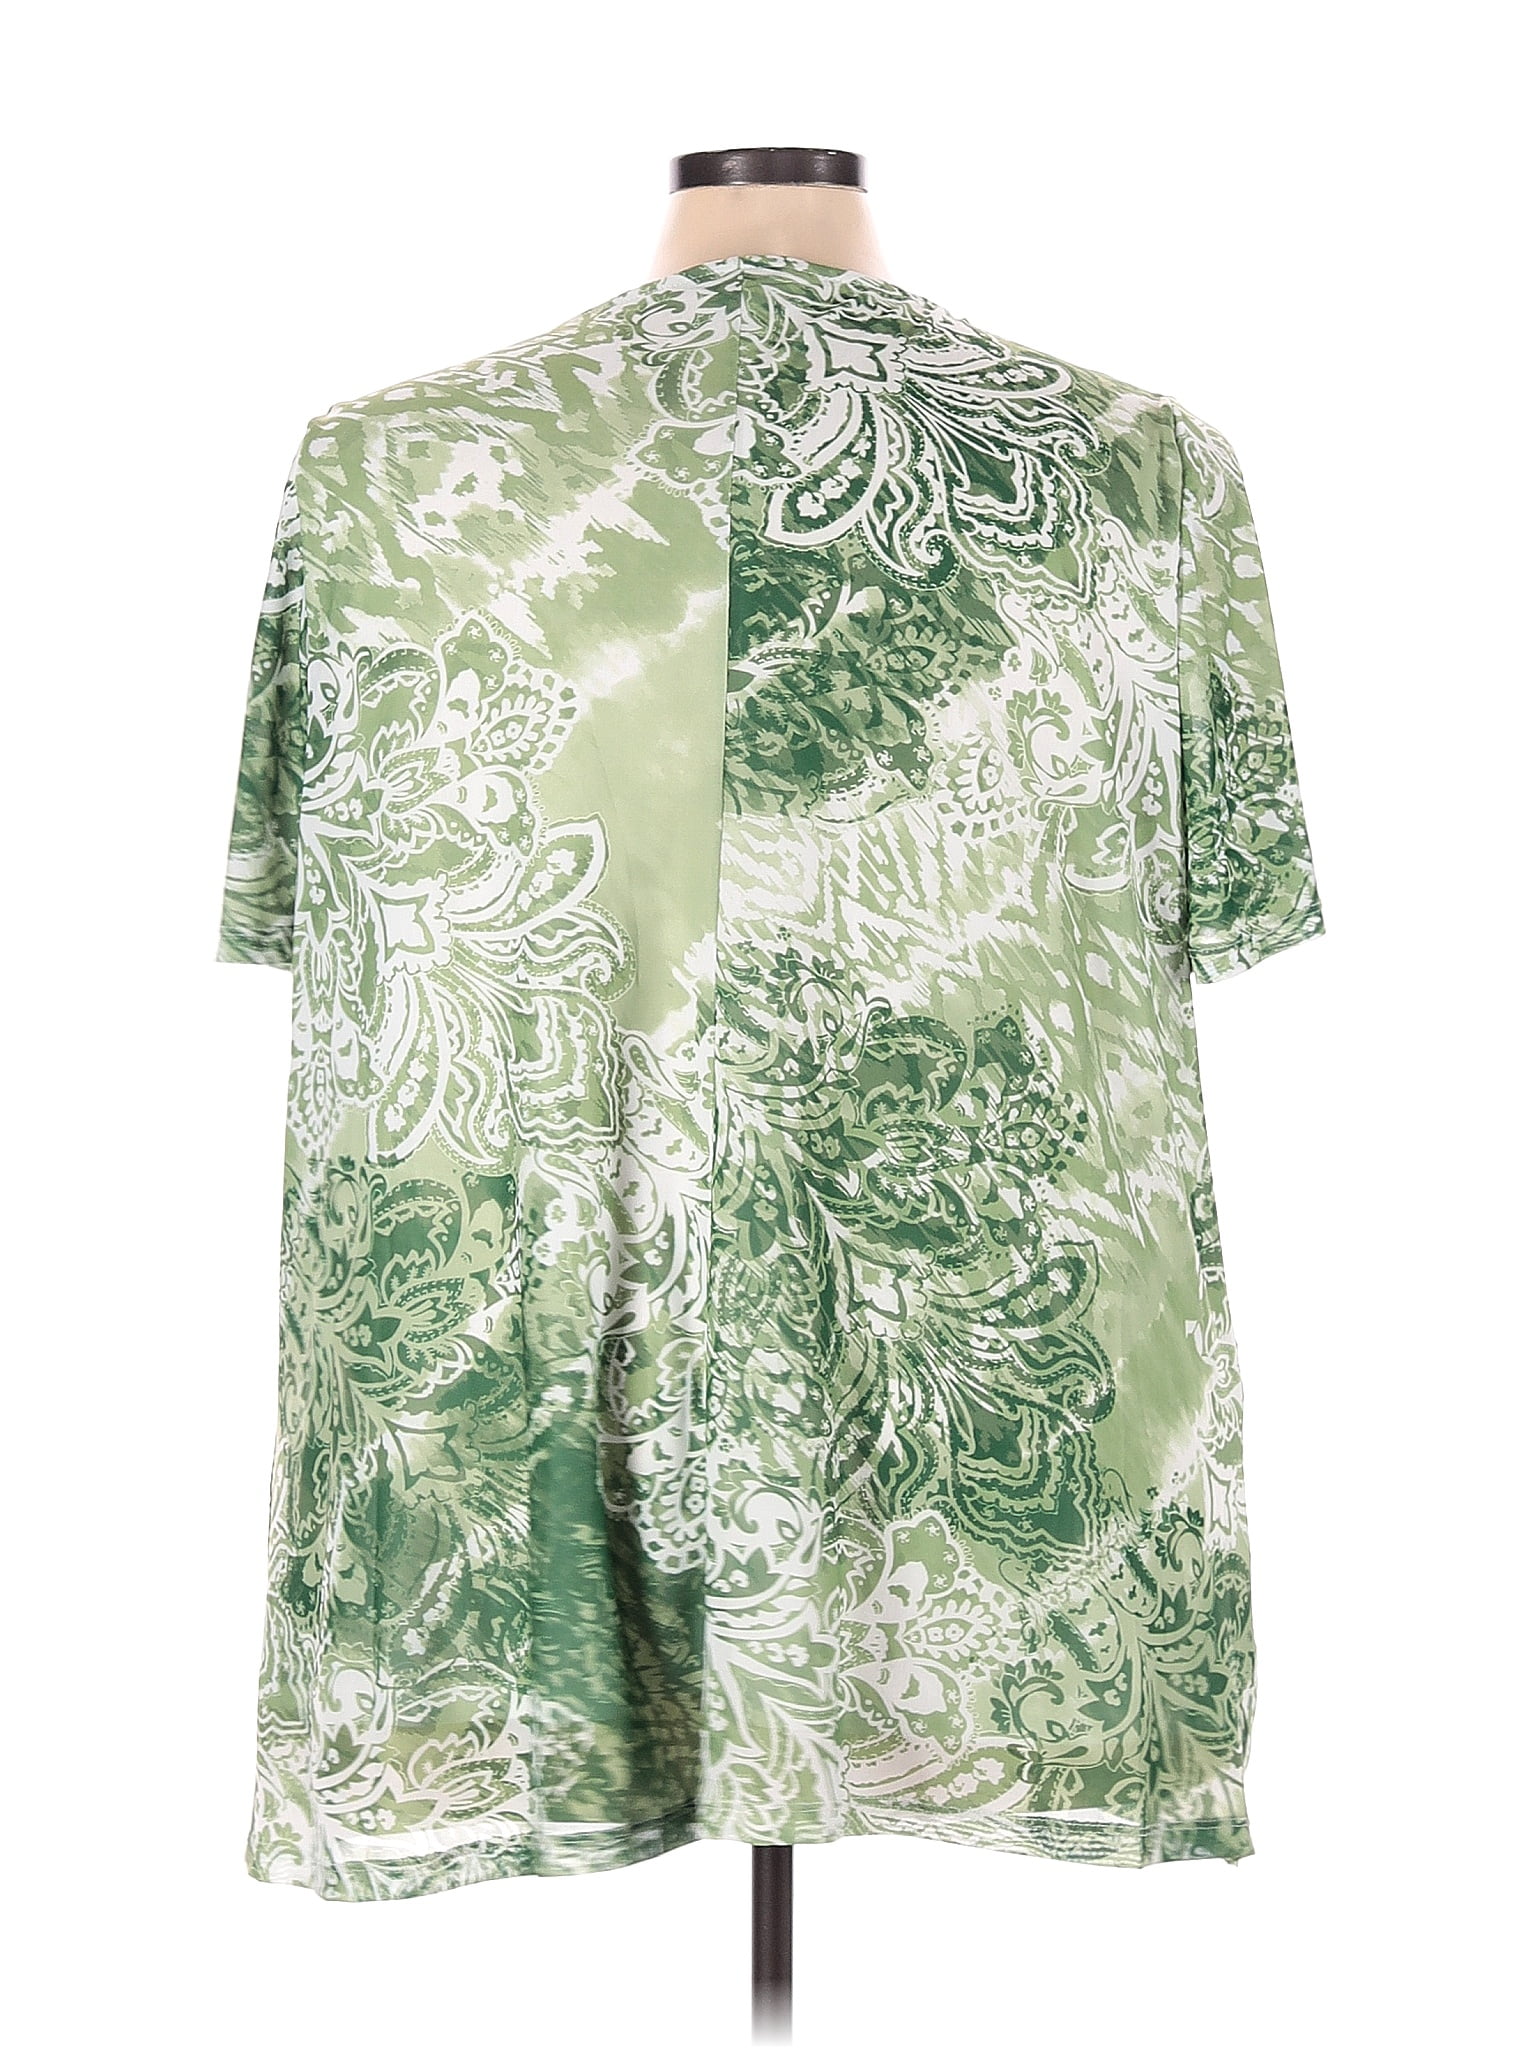 Catherines 100% Polyester Tropical Green Short Sleeve Blouse Size